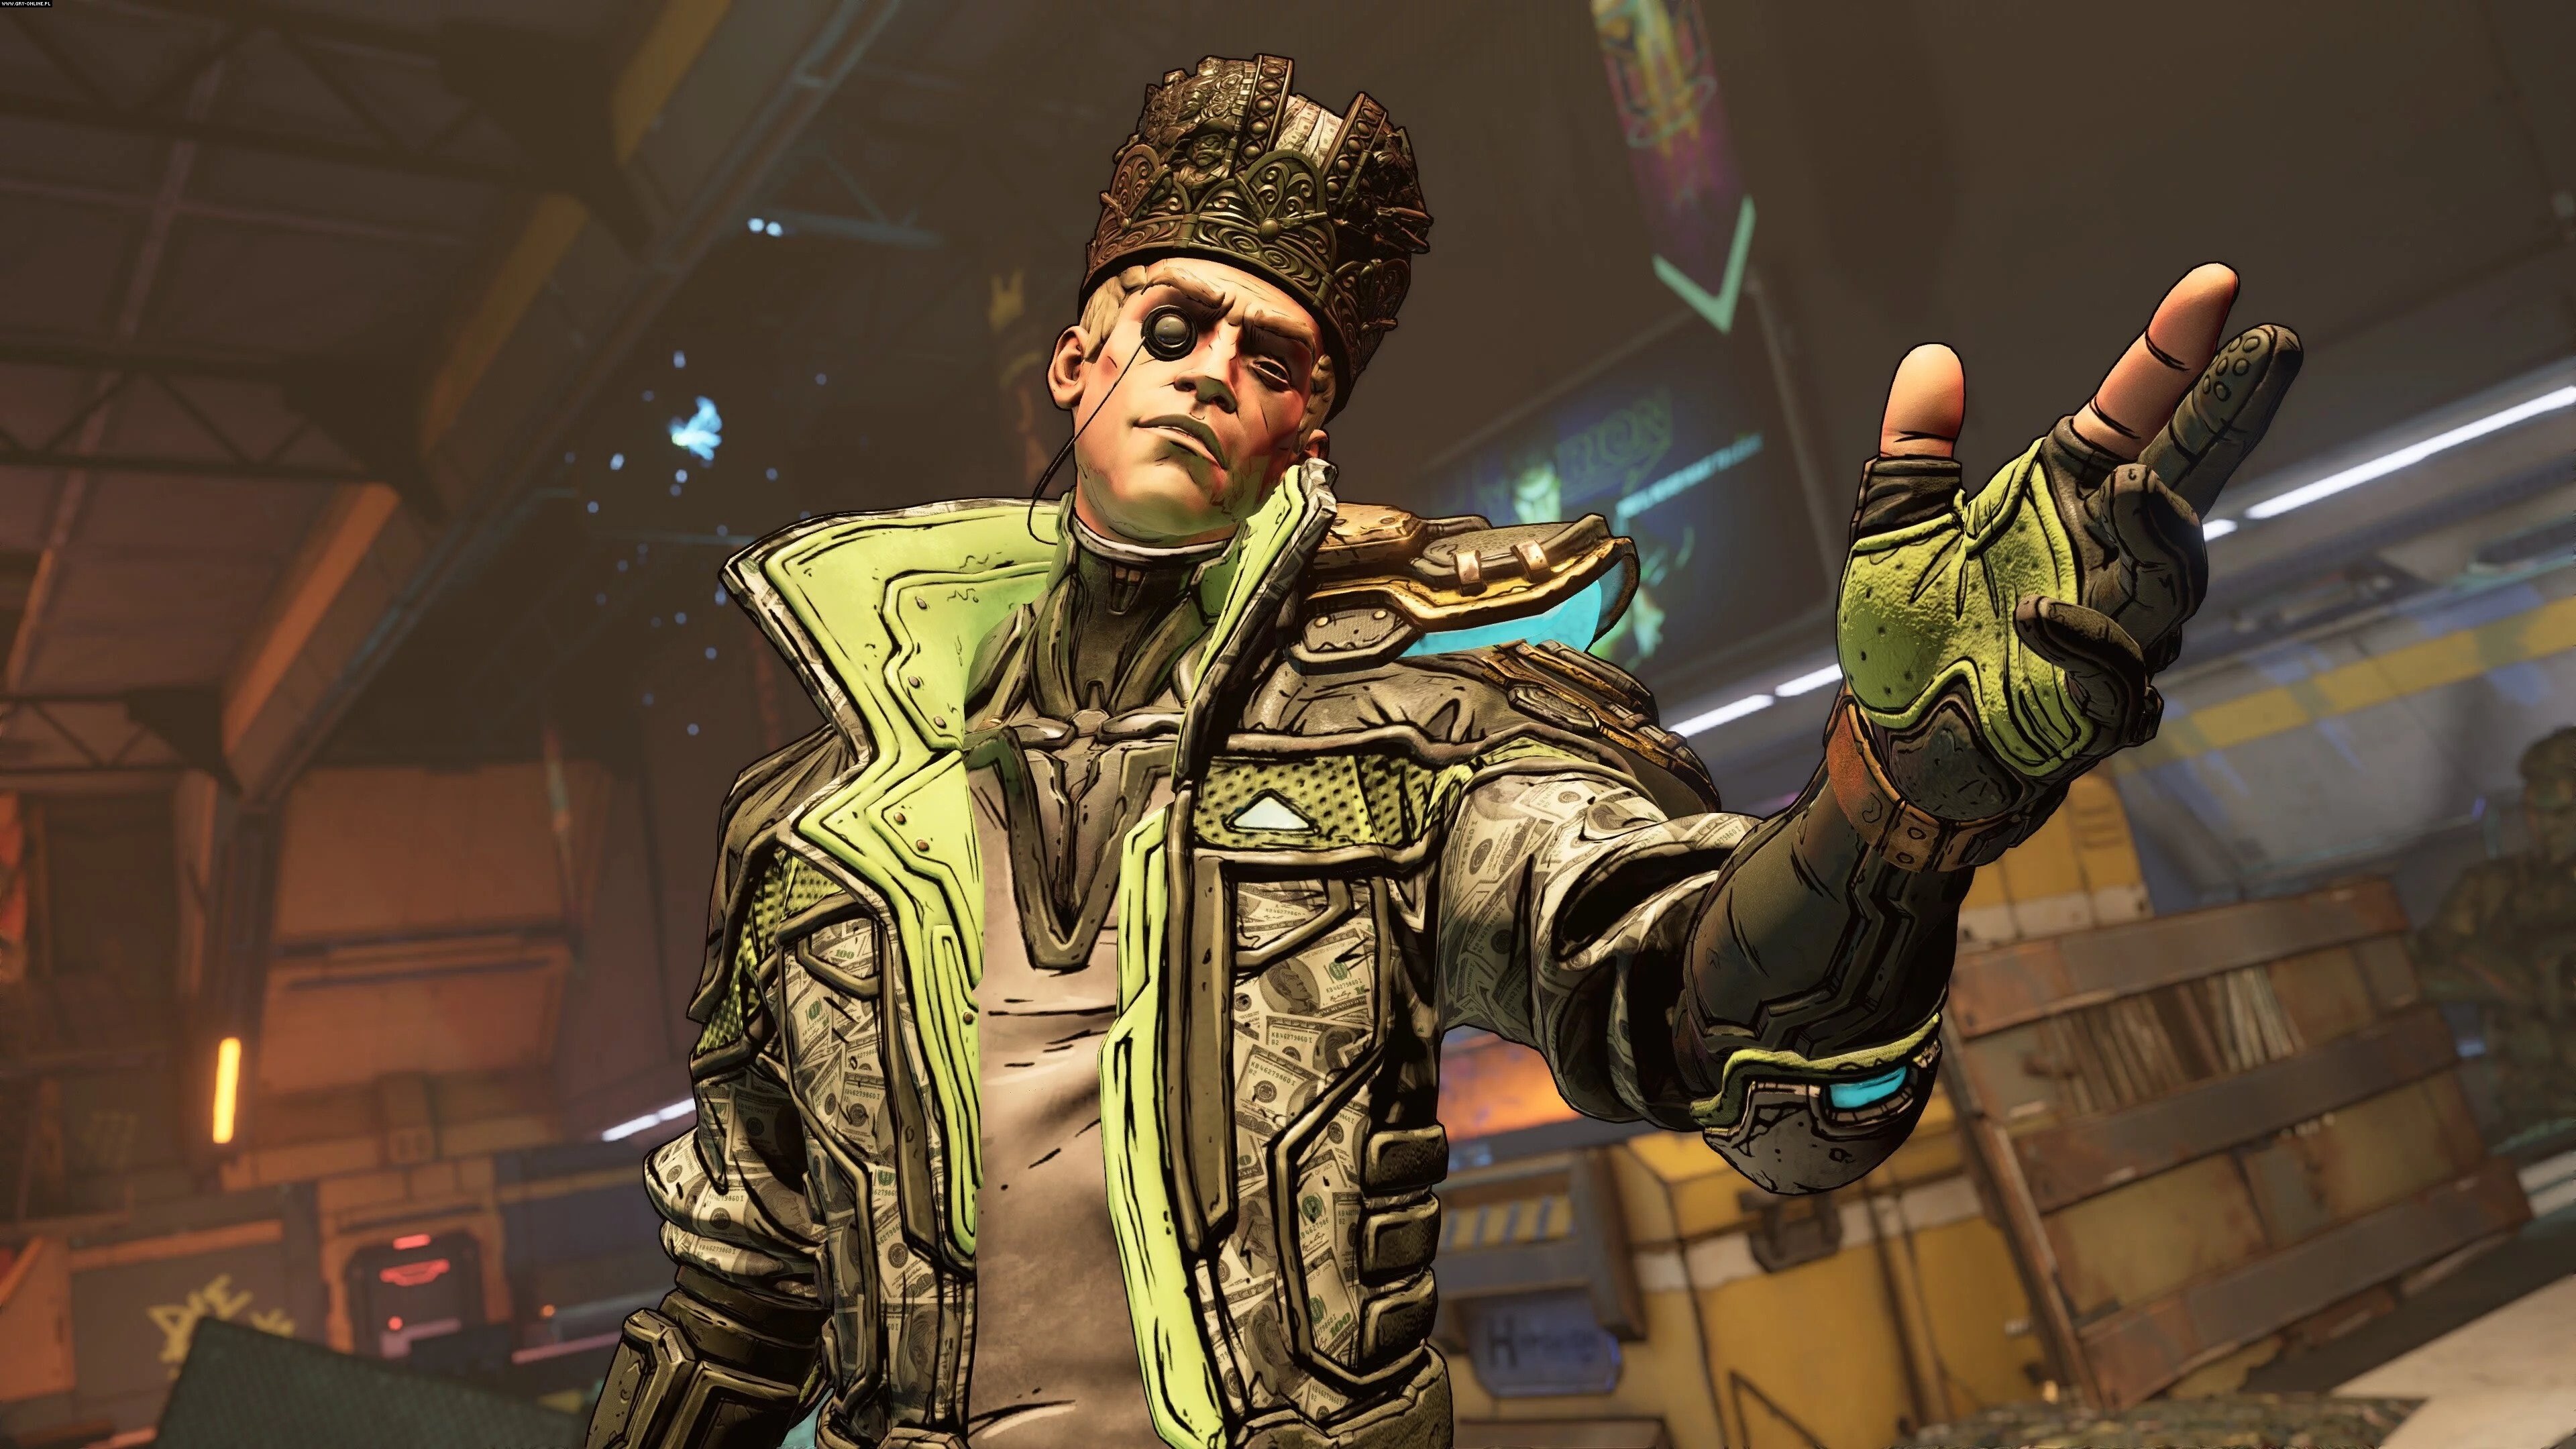 Borderlands 3: Moxxi's Heist of the Handsome Jackpot (PC) - Steam Key - GLOBAL - 3